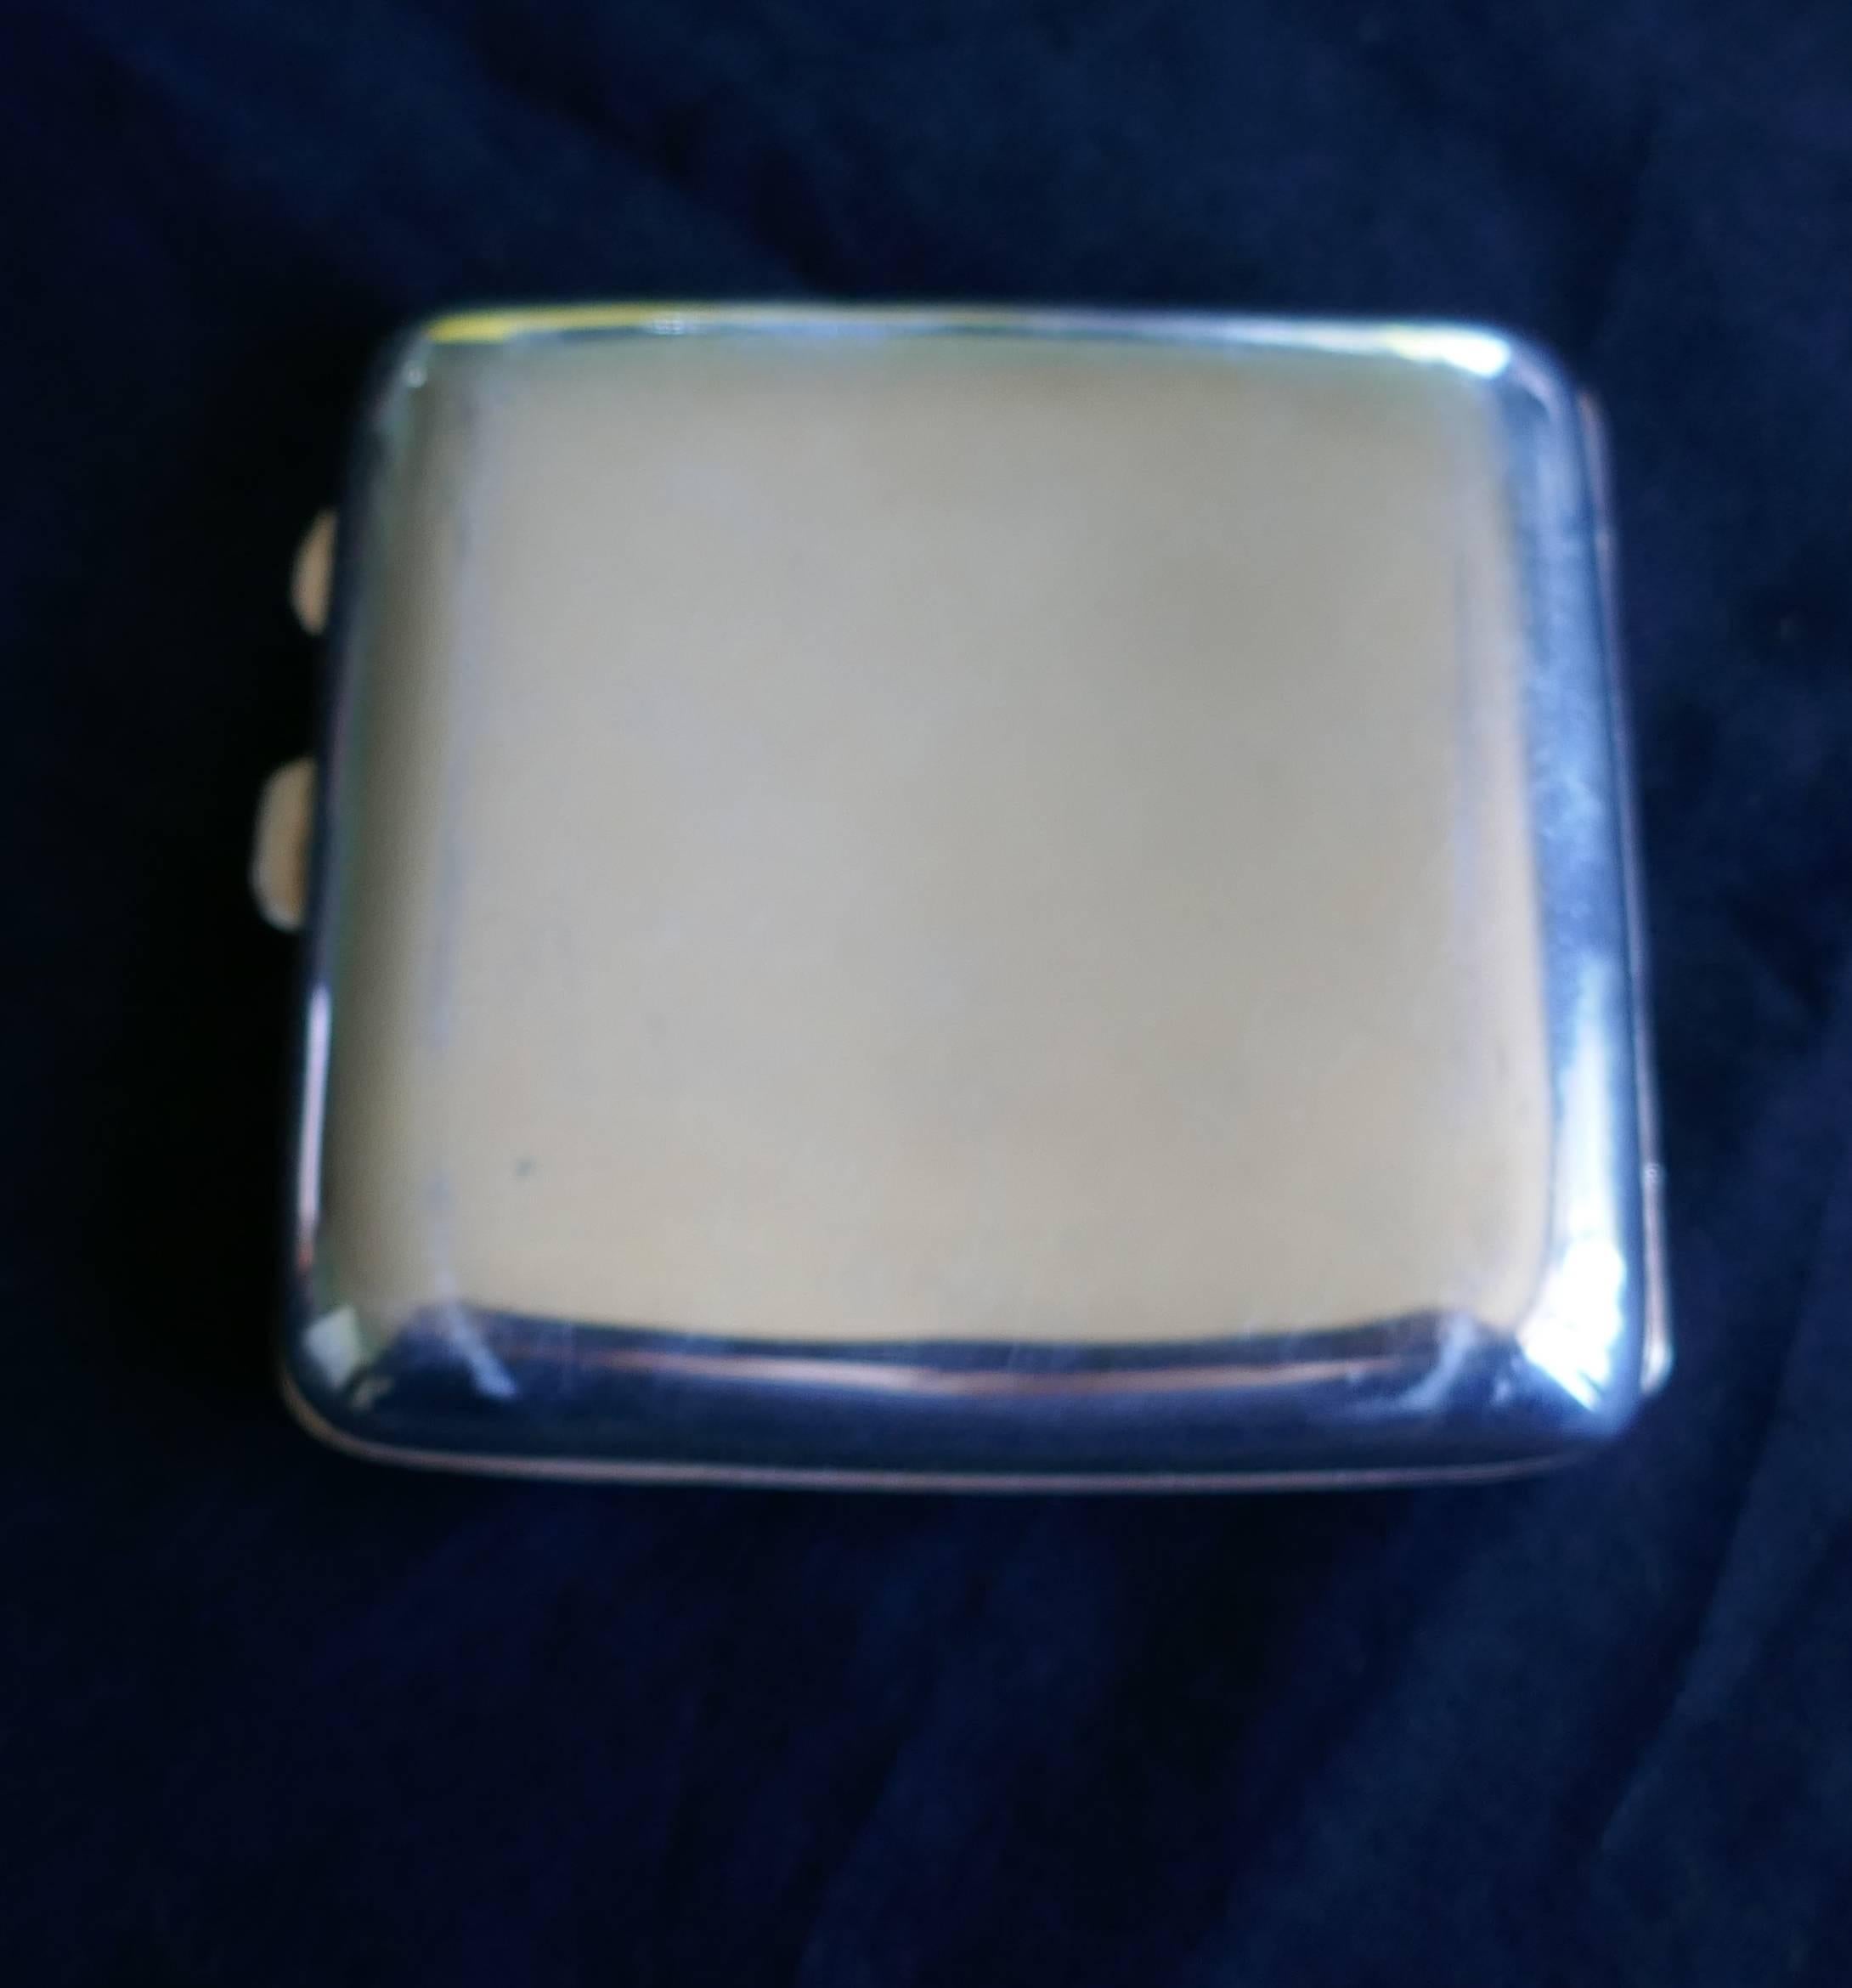 Magnificent Edwardian silver and risqué nude enamel cigarette or card case by Joseph Gloster Ltd

This is an exceptional antique Edwardian sterling silver cigarette case has a plain rectangular shape with rounded corners.
The charming young lady